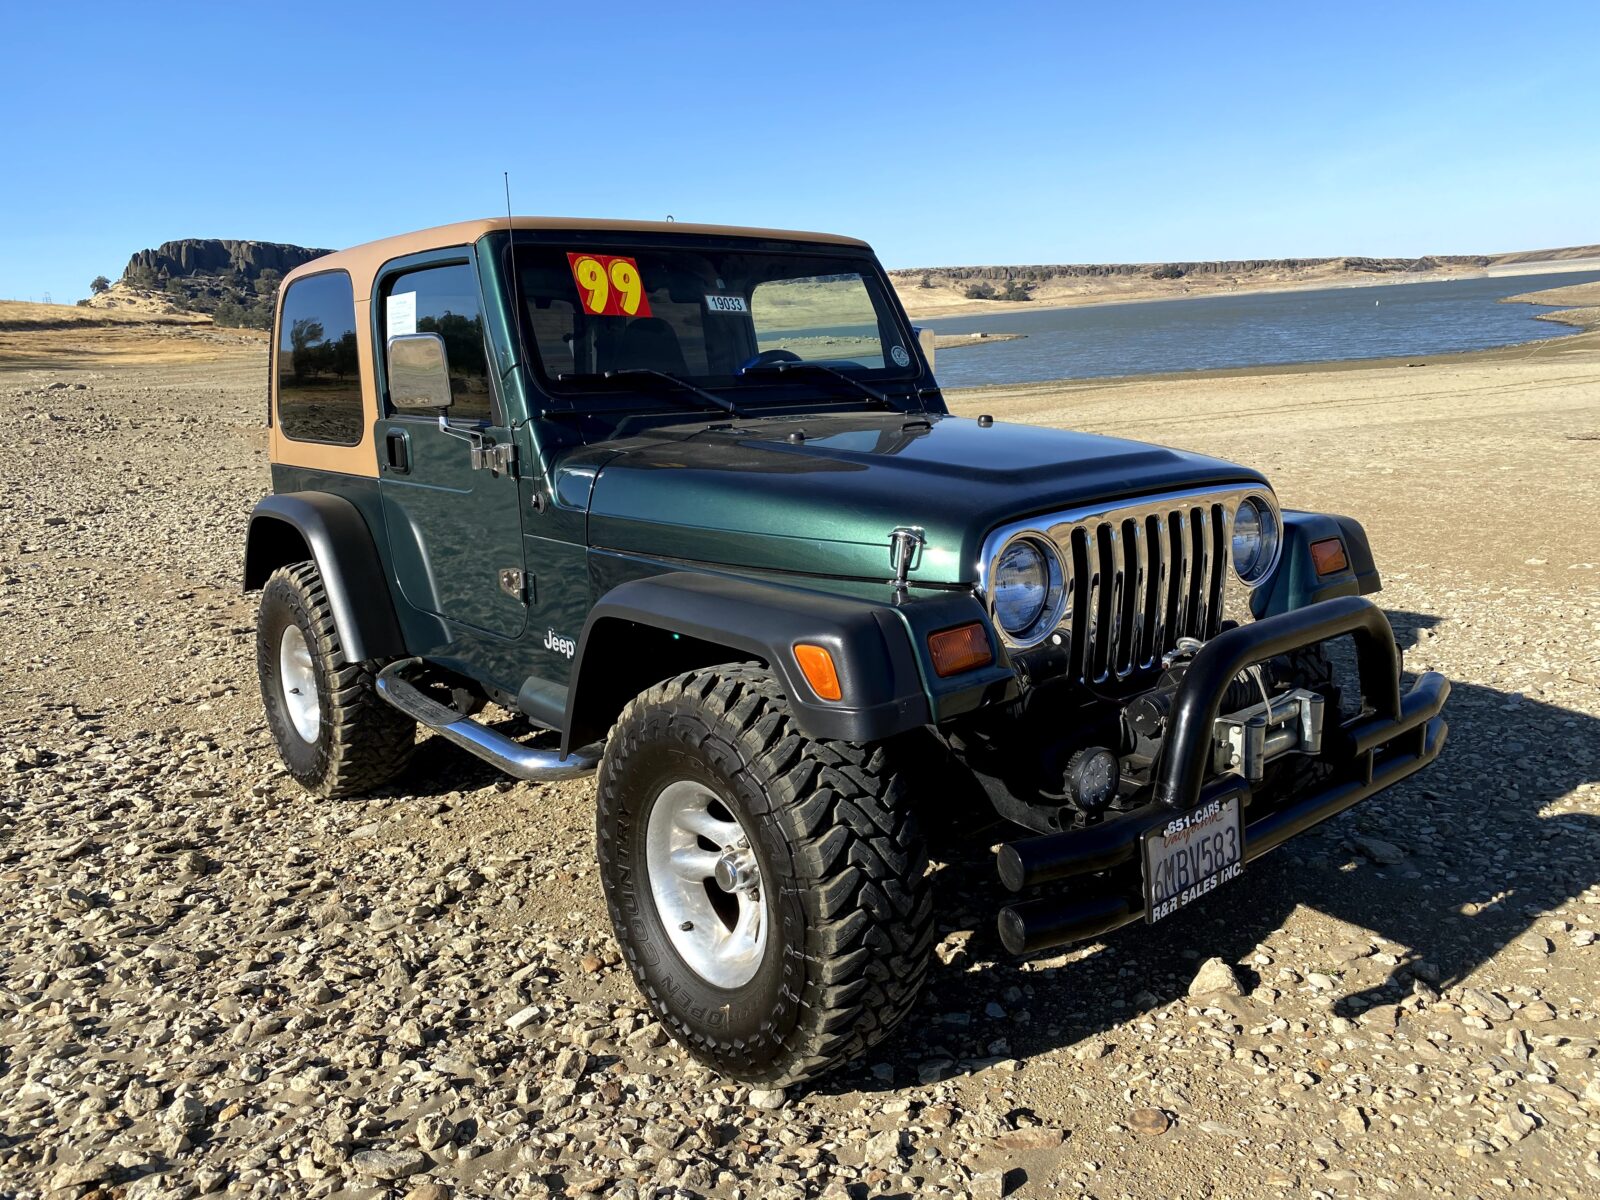 Check out this low mileage 1999 Jeep Wrangler, offered by WestMitsubishi.com